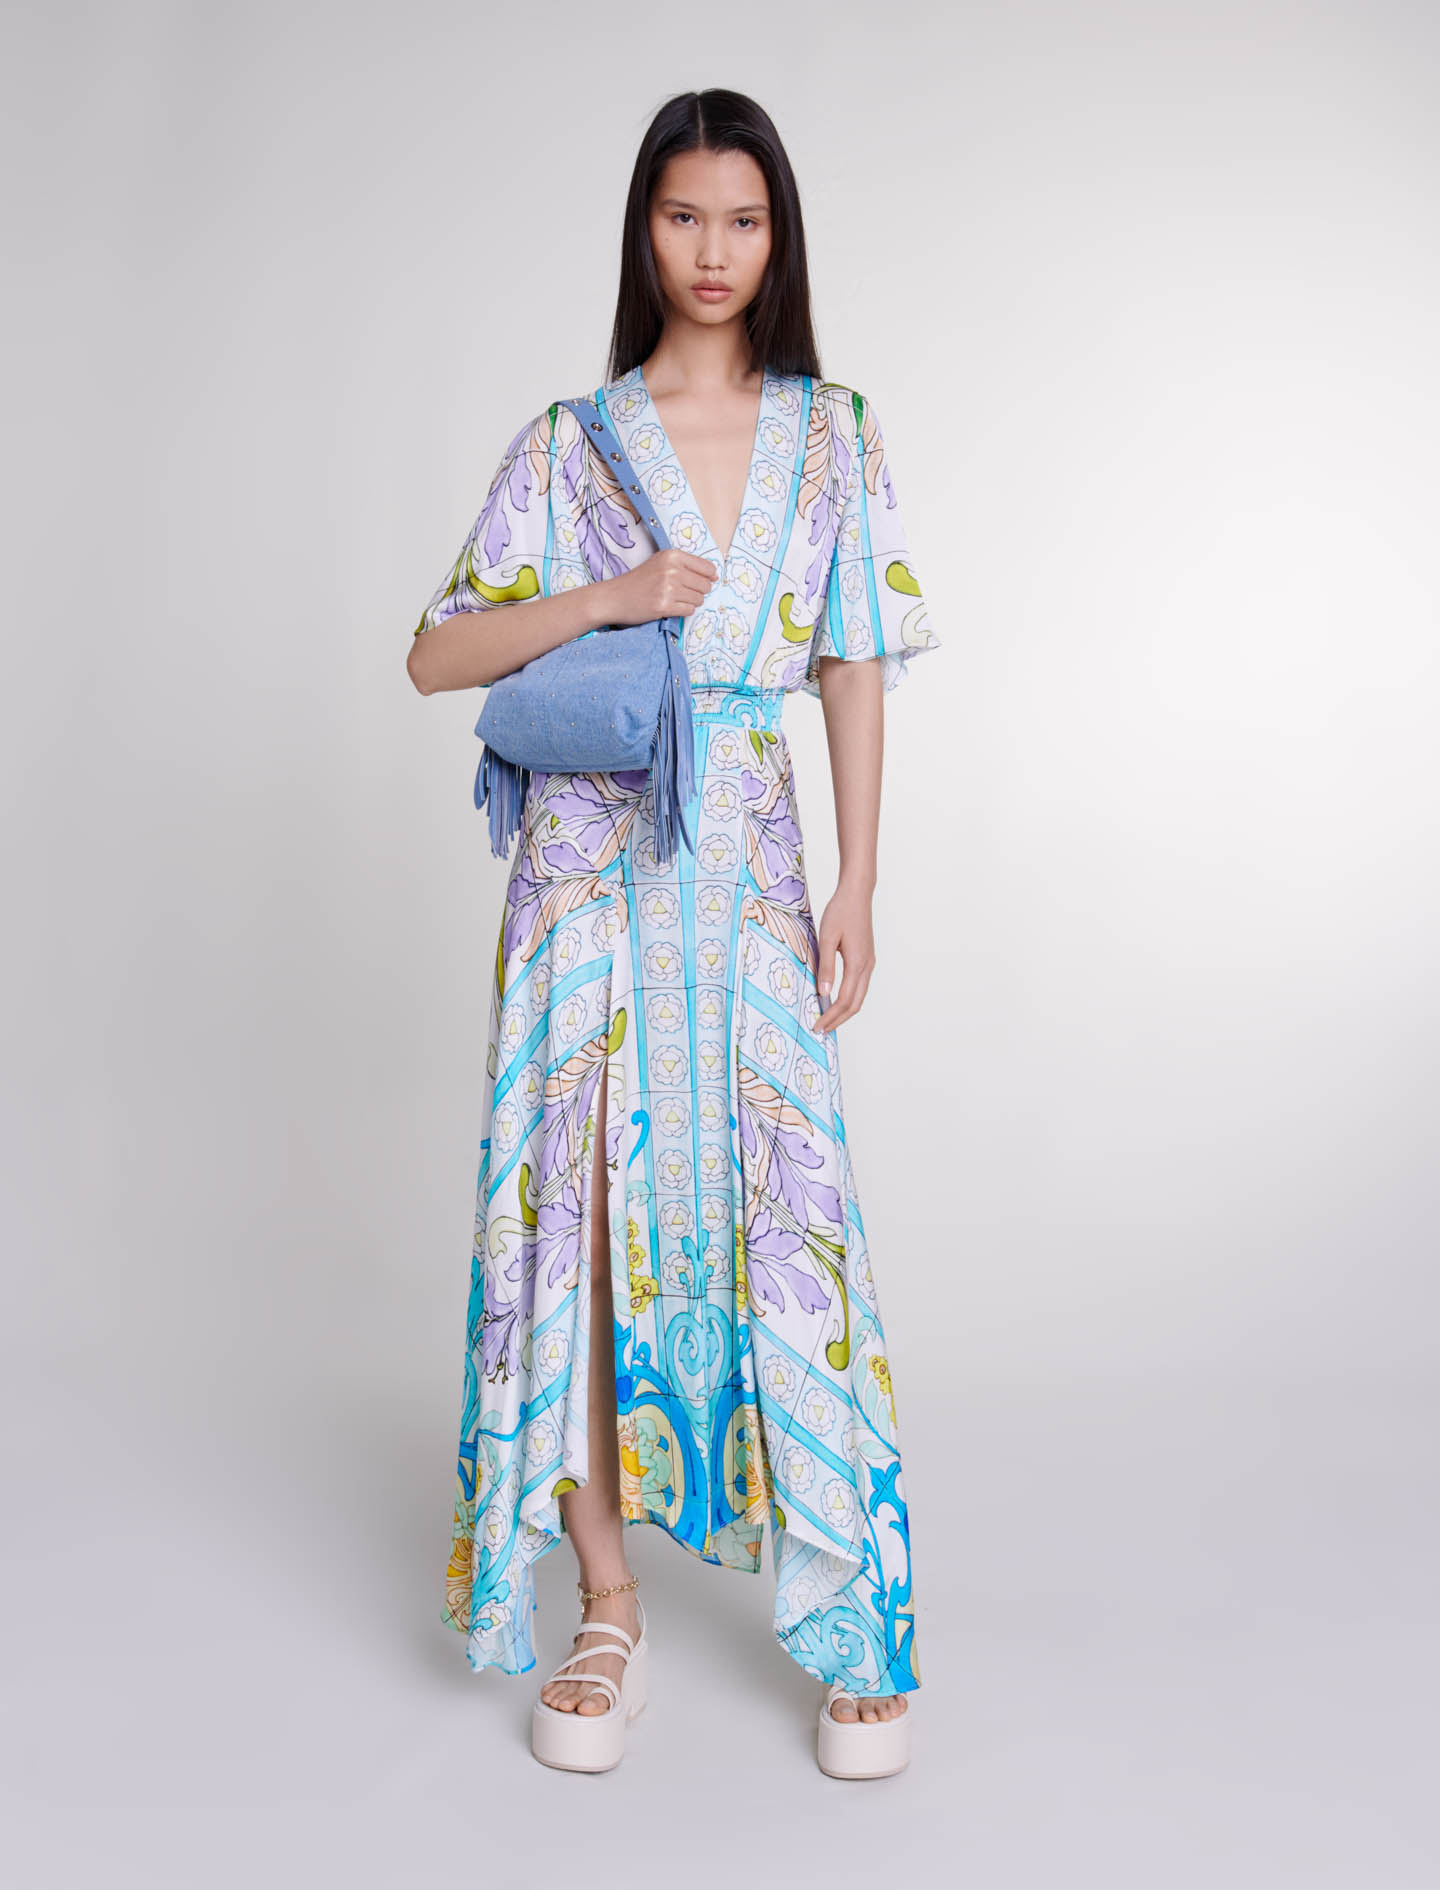 Maje Woman's viscose Secondary fabric: Satin-look patterned maxi dress, in color Mosaic Print /